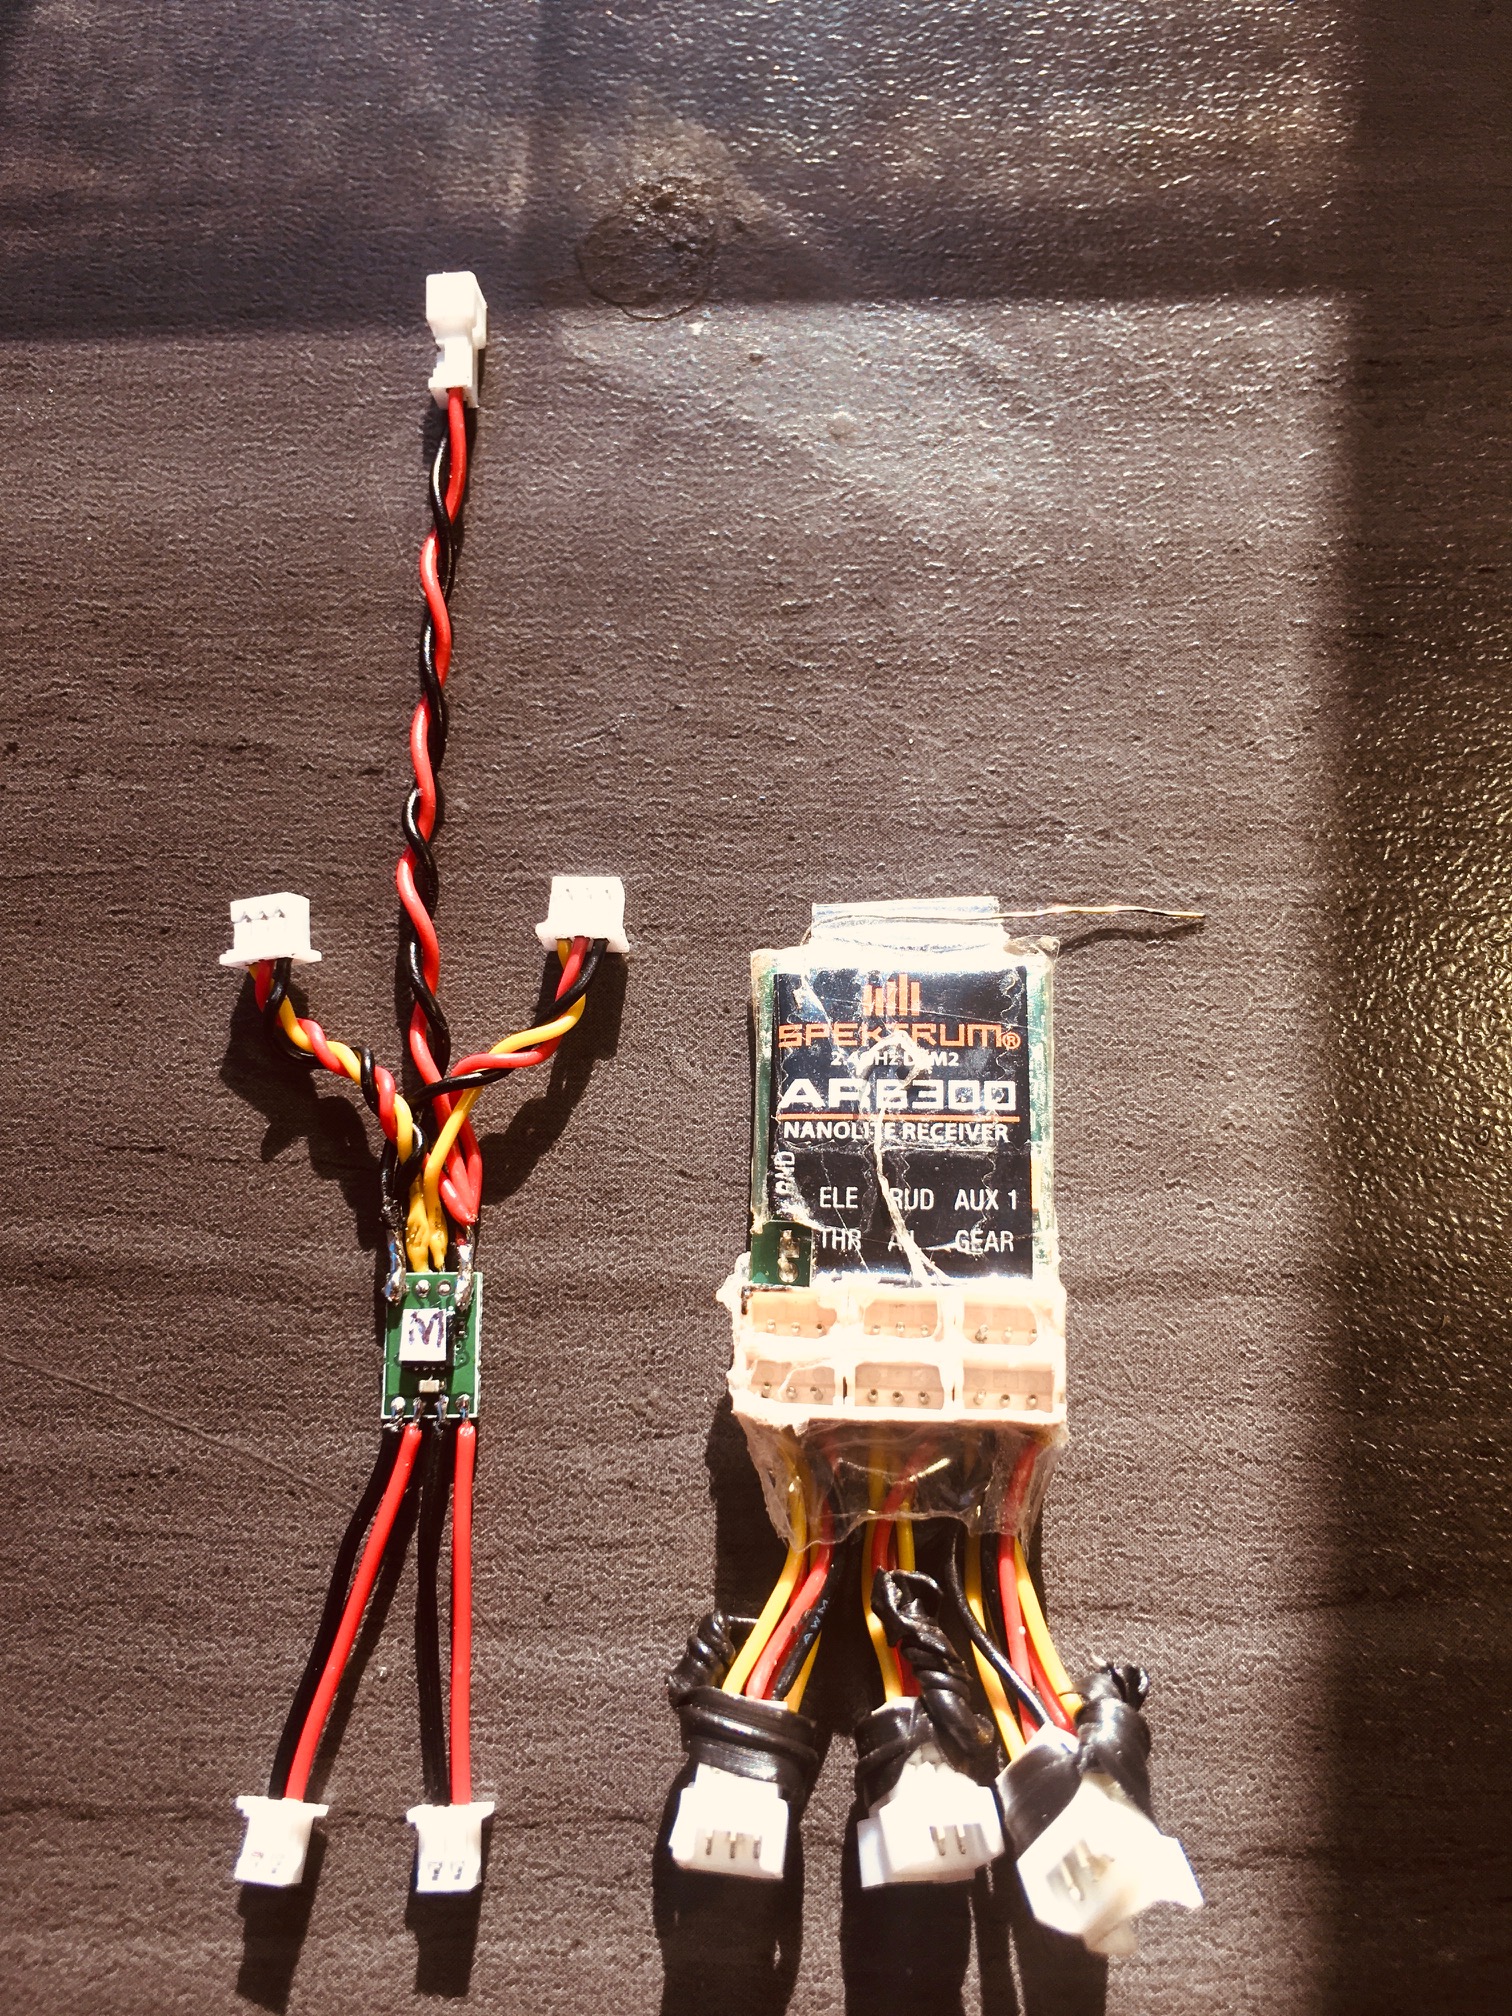 Latest ultra micro dual ESC\mixer with 6 channel AR6300 receiver. This one goes in the M60.